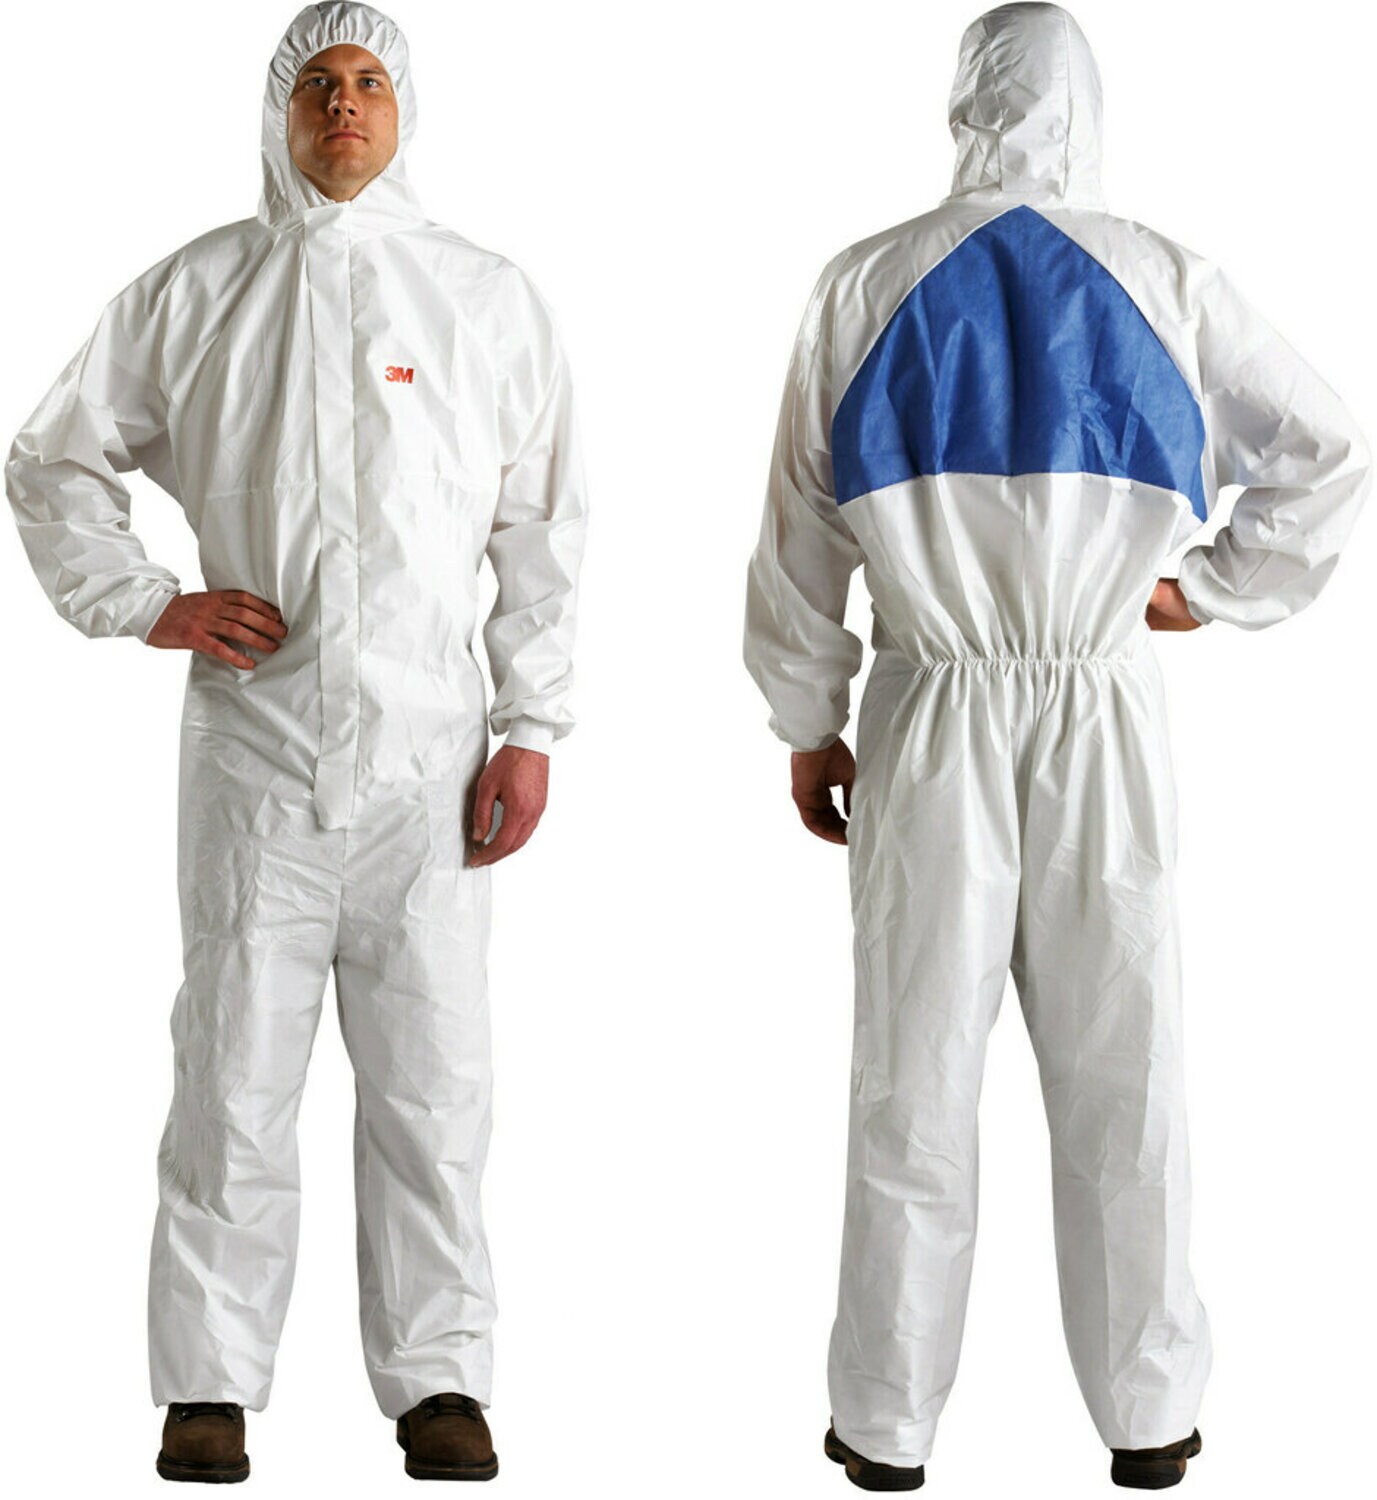 7100041420 - 3M Disposable Protective Coverall 4540+4XL, 1/Bag, 20 Bags EA/Case